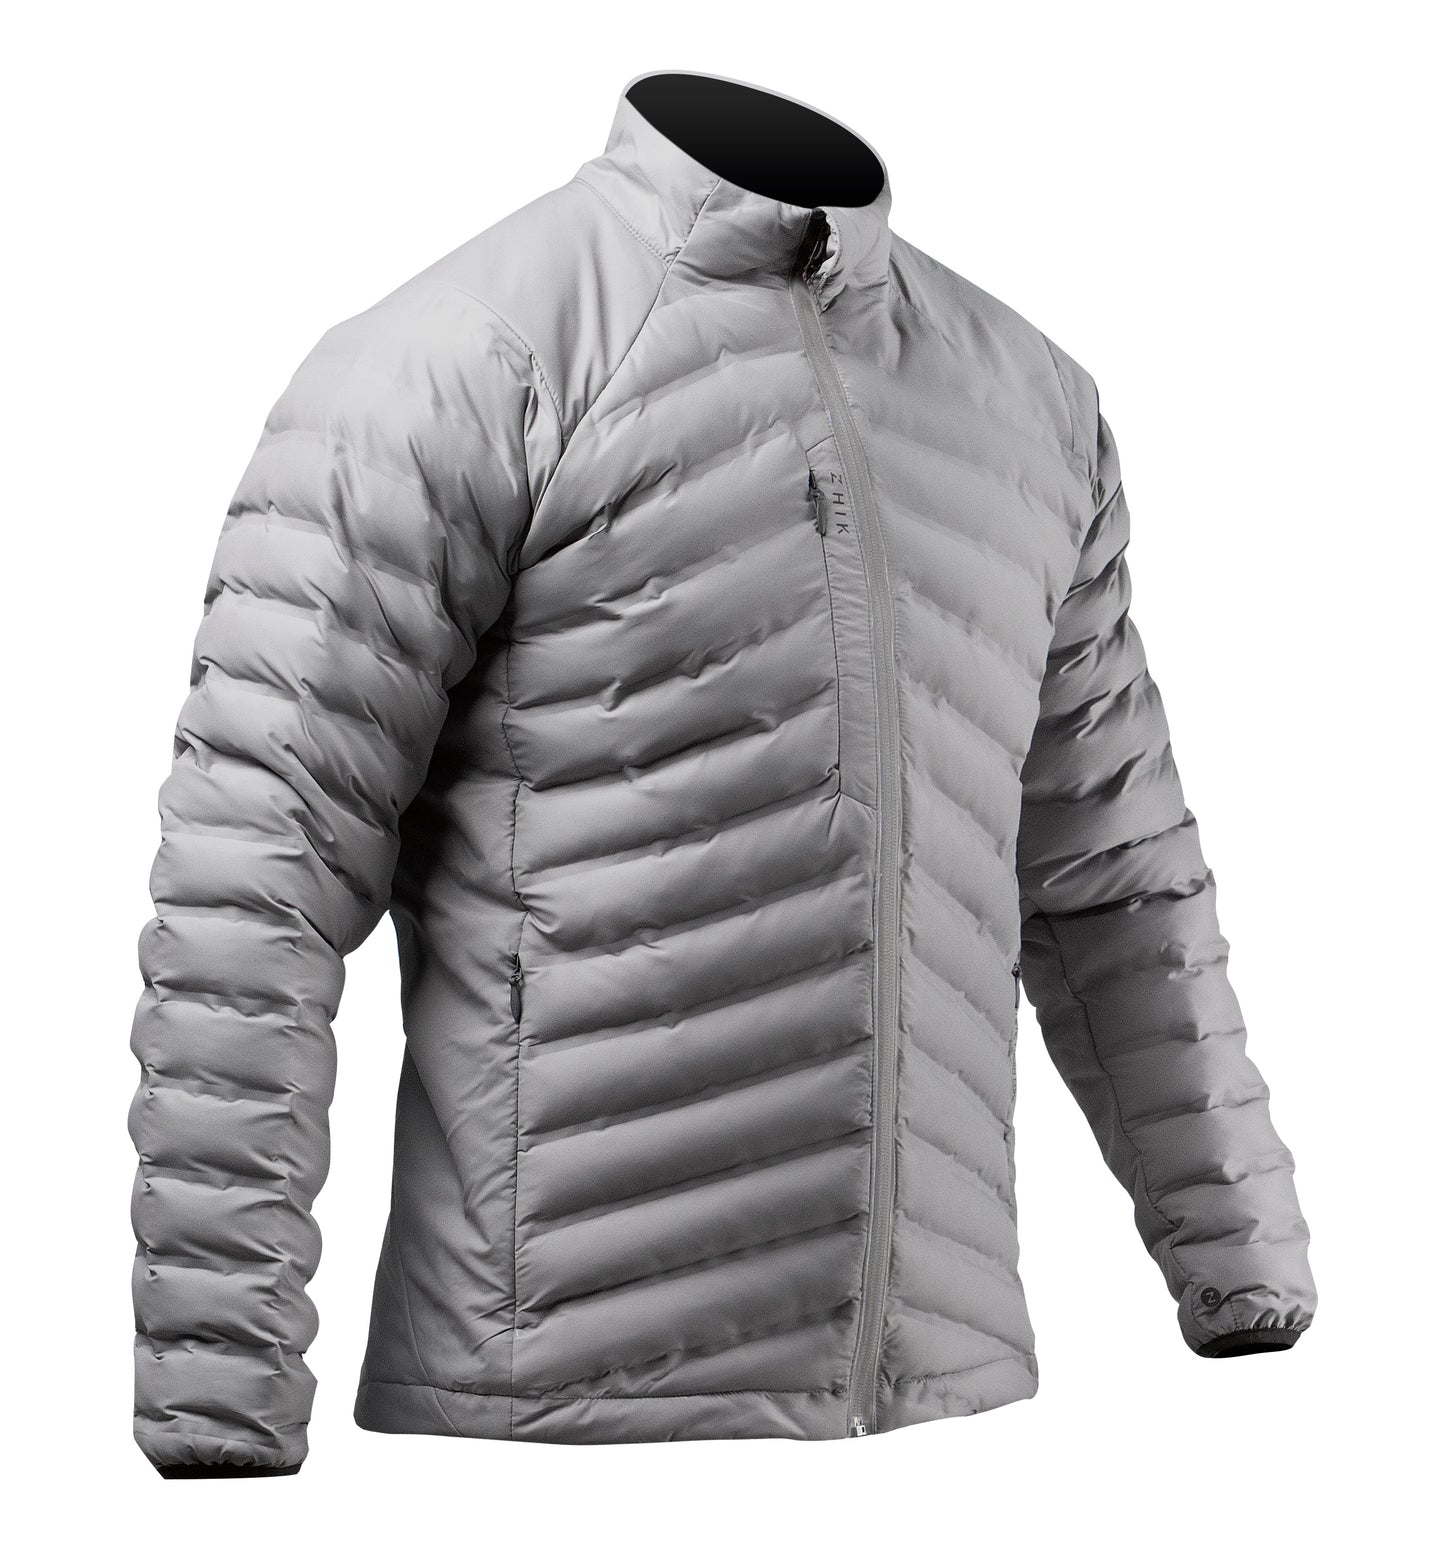 ZHIK Mens Cell Insulated Jacket